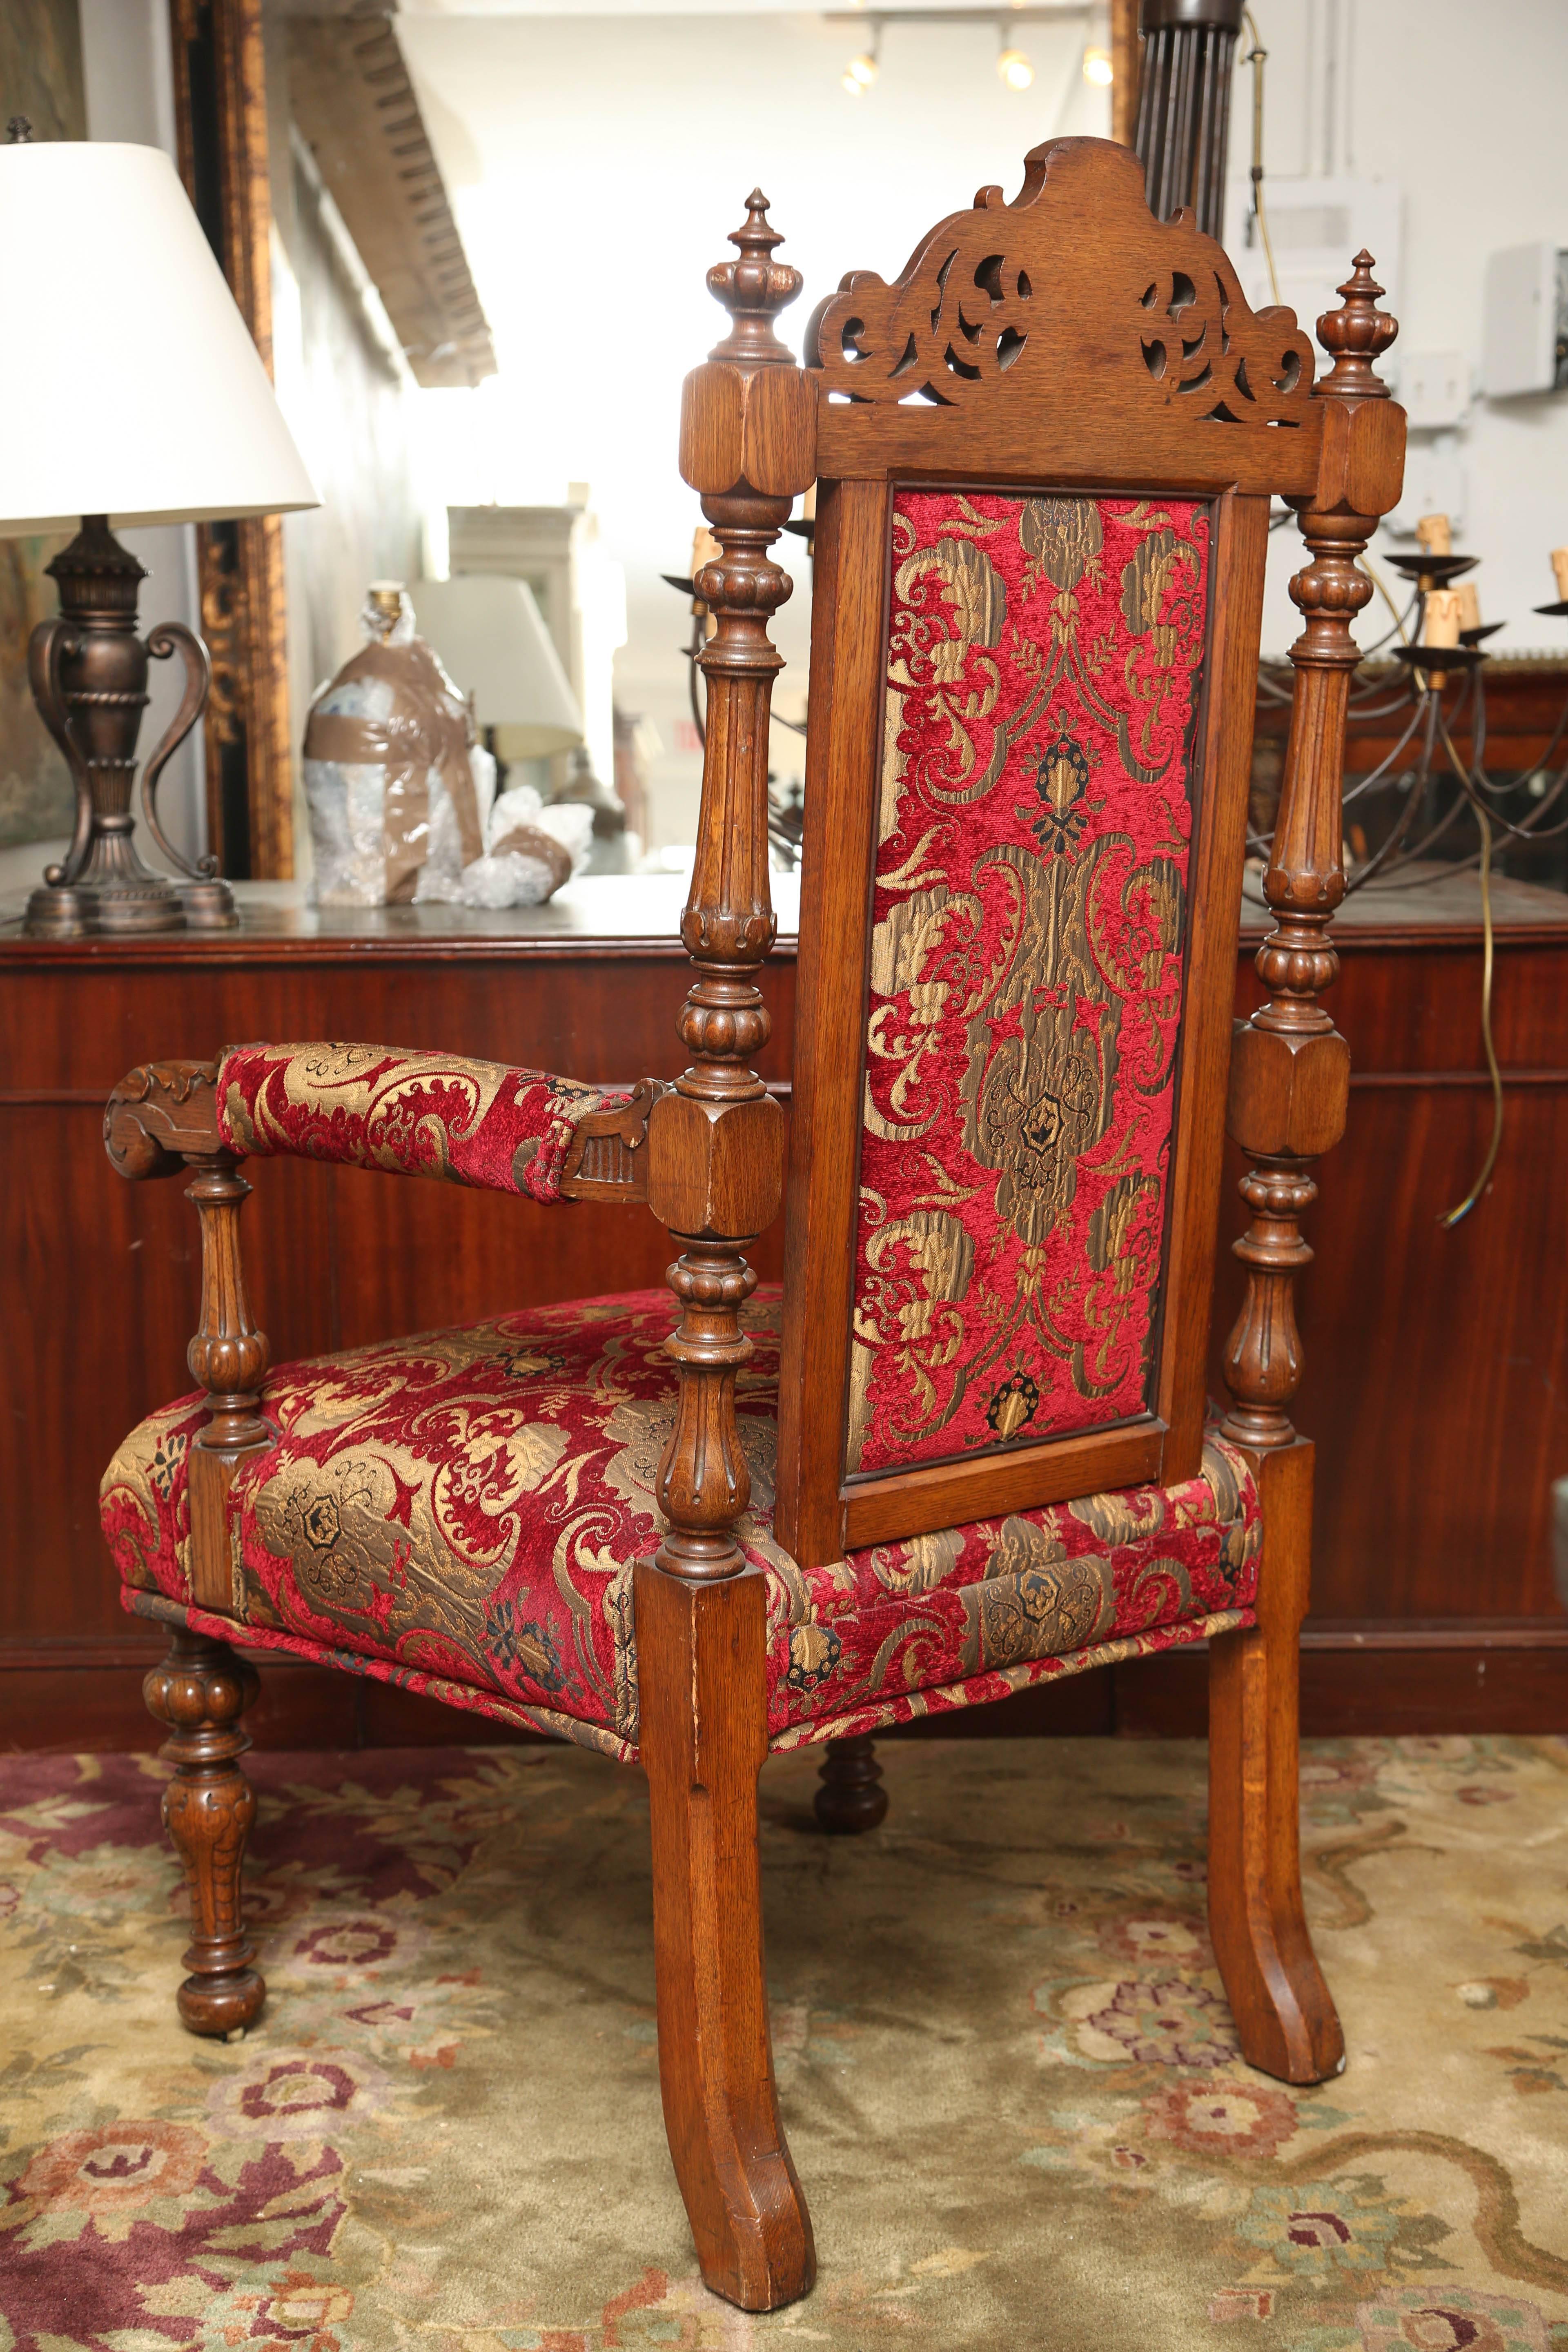 These are a very nice impressive pair of carved oak armchairs in a light color.
They sit on turned legs with carved arms and a carved crest to the top.
The fabric is in good condition, and the chairs are very comfortable.
These were made in